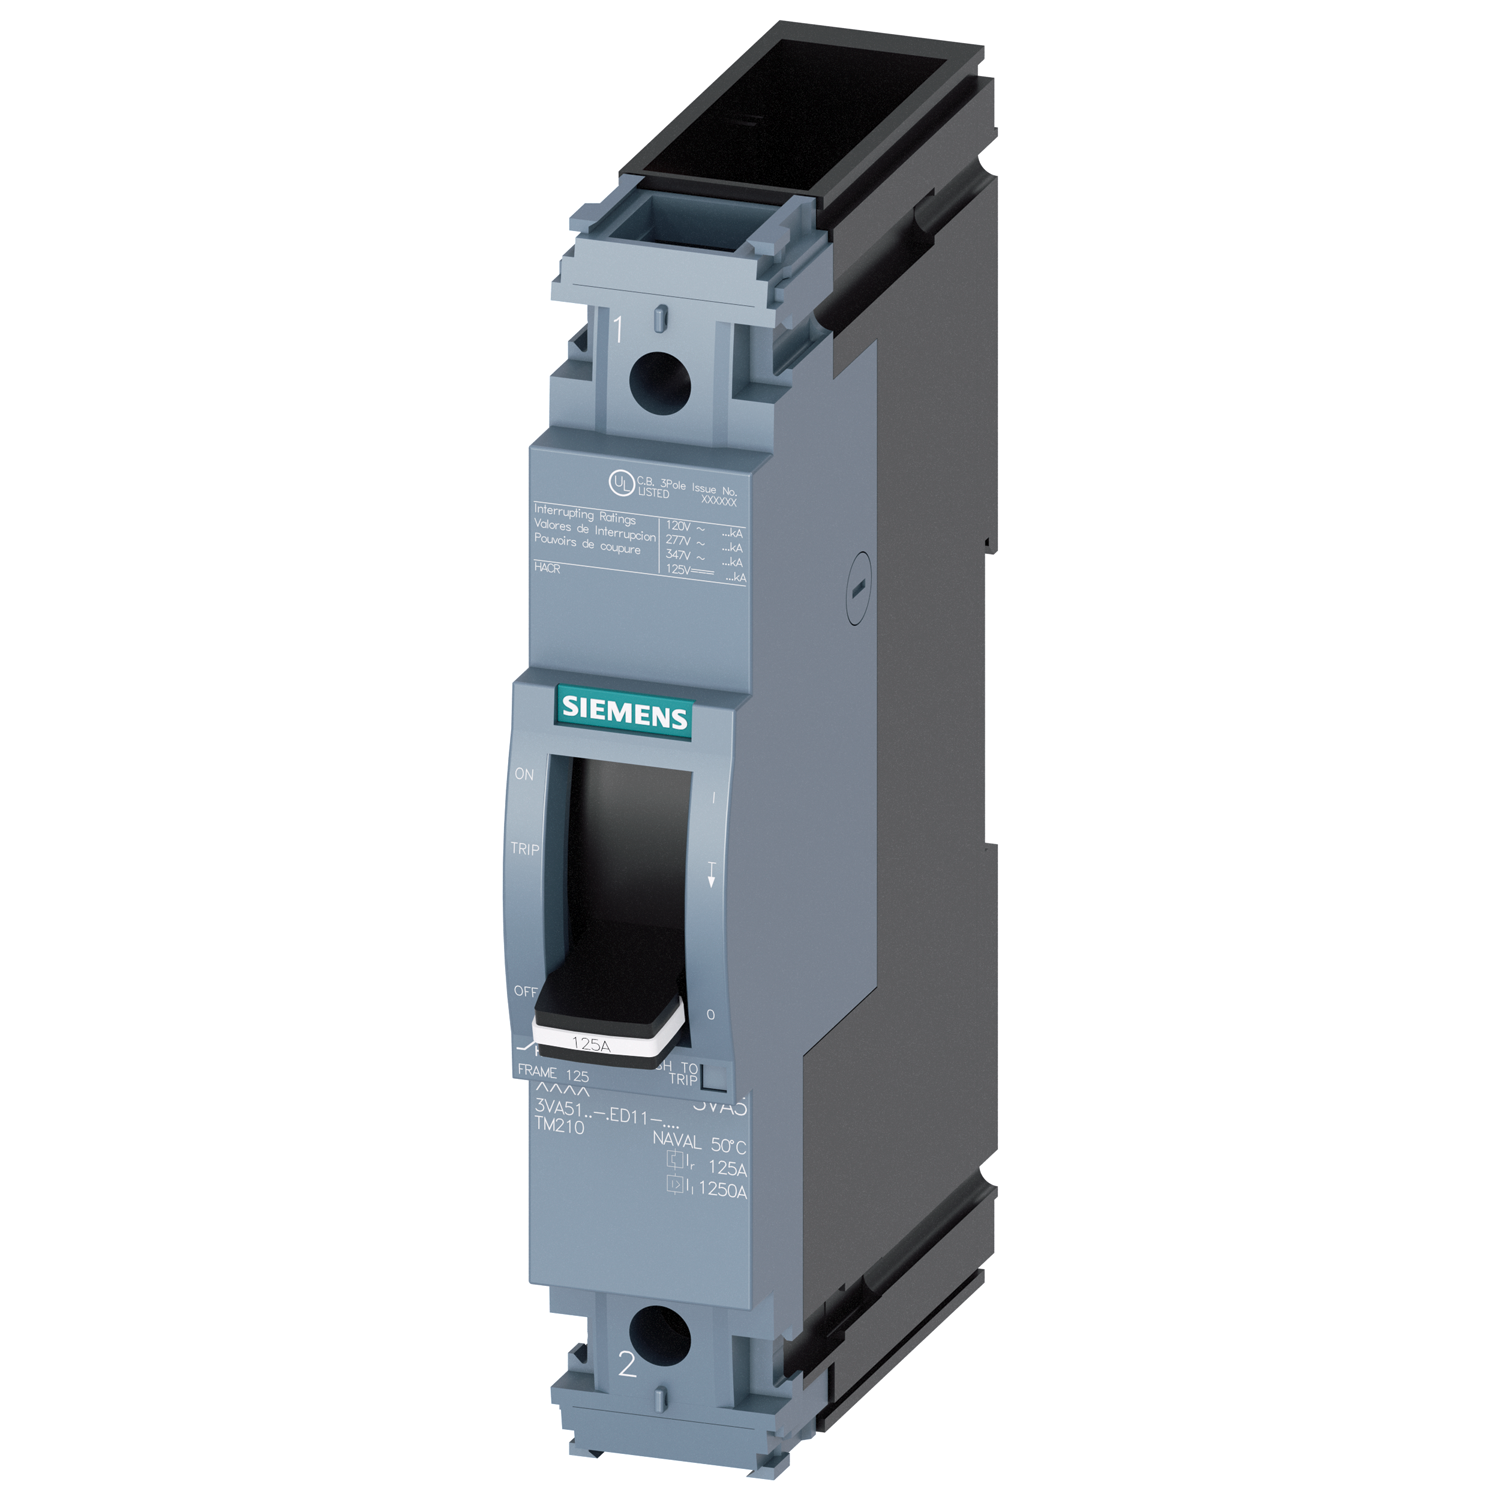 SIEMENS LOW VOLTAGE 3VA UL MOLDED CASE CIRCUIT BREAKER WITH THERMAL - MAGNETIC TRIP UNIT. 3VA51 FRAME WITH HIGH (CLASS H) BREAKING CAPACITY. 20A 3-POLE (25KAICAT 600Y/347) (65KAIC AT 480V). TM210 TRIP UNIT WITH FIXED Ir FIXED Ii. SPECIAL FEATURES WITHOUT LUGS NAVAL RATED 50C. DIMENSIONS (W x H x D) IN 3 x 5.5 x 3.7.